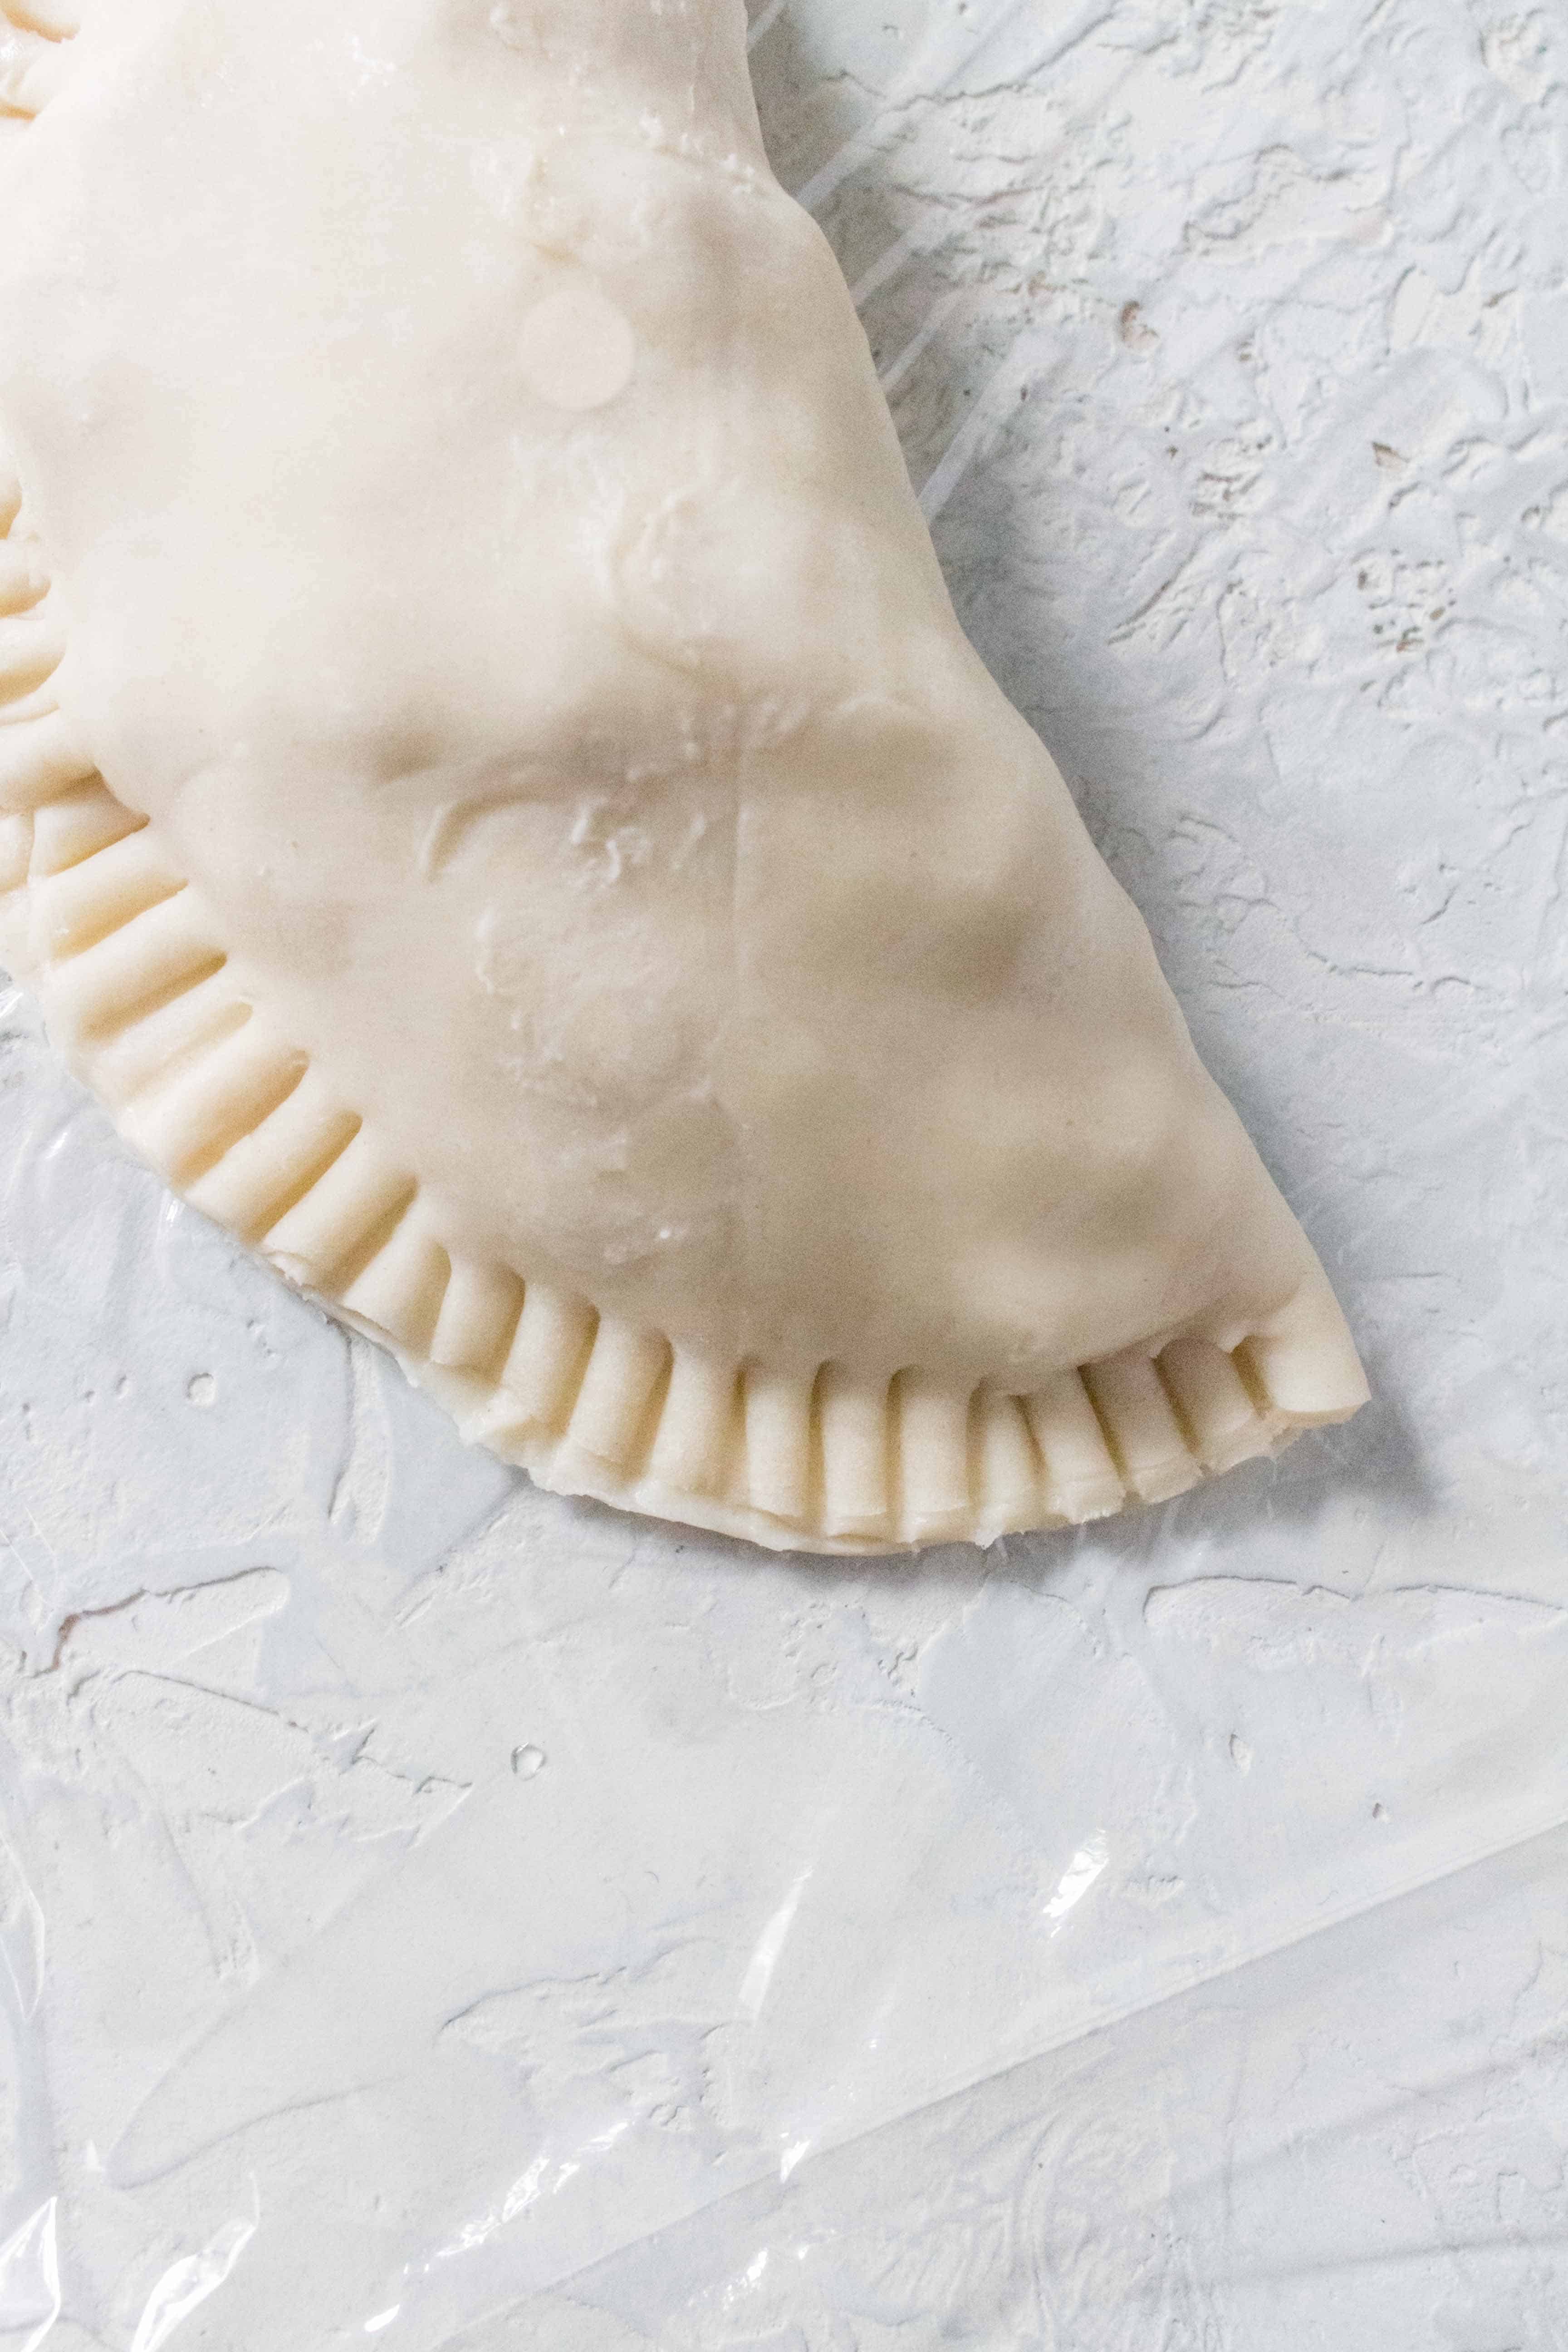 HOW TO FOLD THE HAND PIES